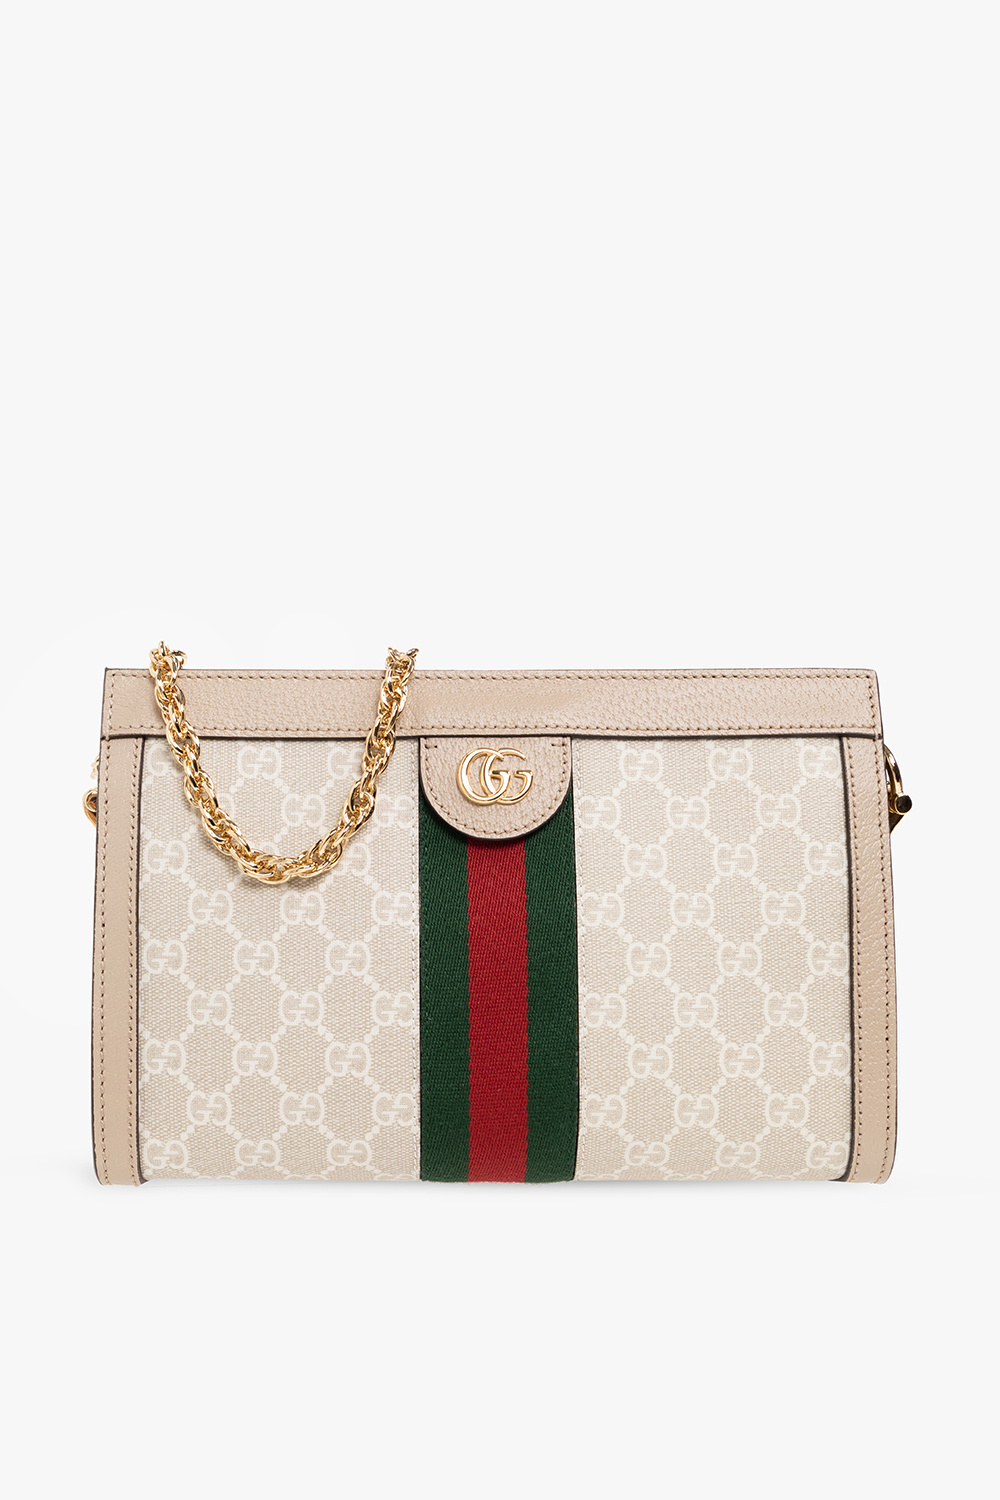 Gucci ‘Ophidia GG Small’ shoulder bag